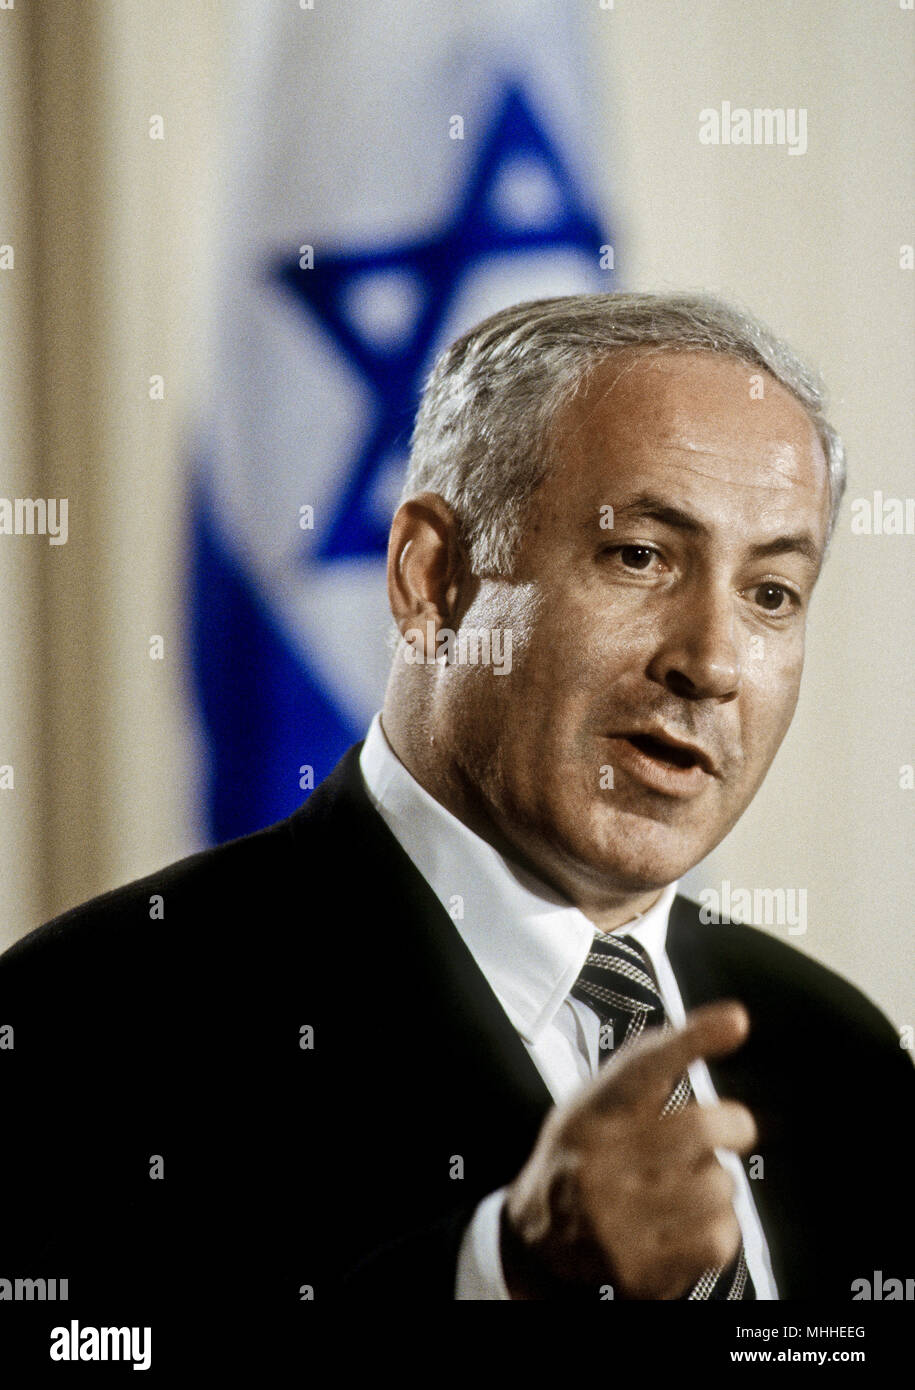 Washington, DC. USA,  July 9, 1996  Israeli Prime Minister Benjamin Netanyahu answers reporters questions during a formal joint news conference with President WIlliam Jefferson Clinton in the East Room of the White House. Stock Photo